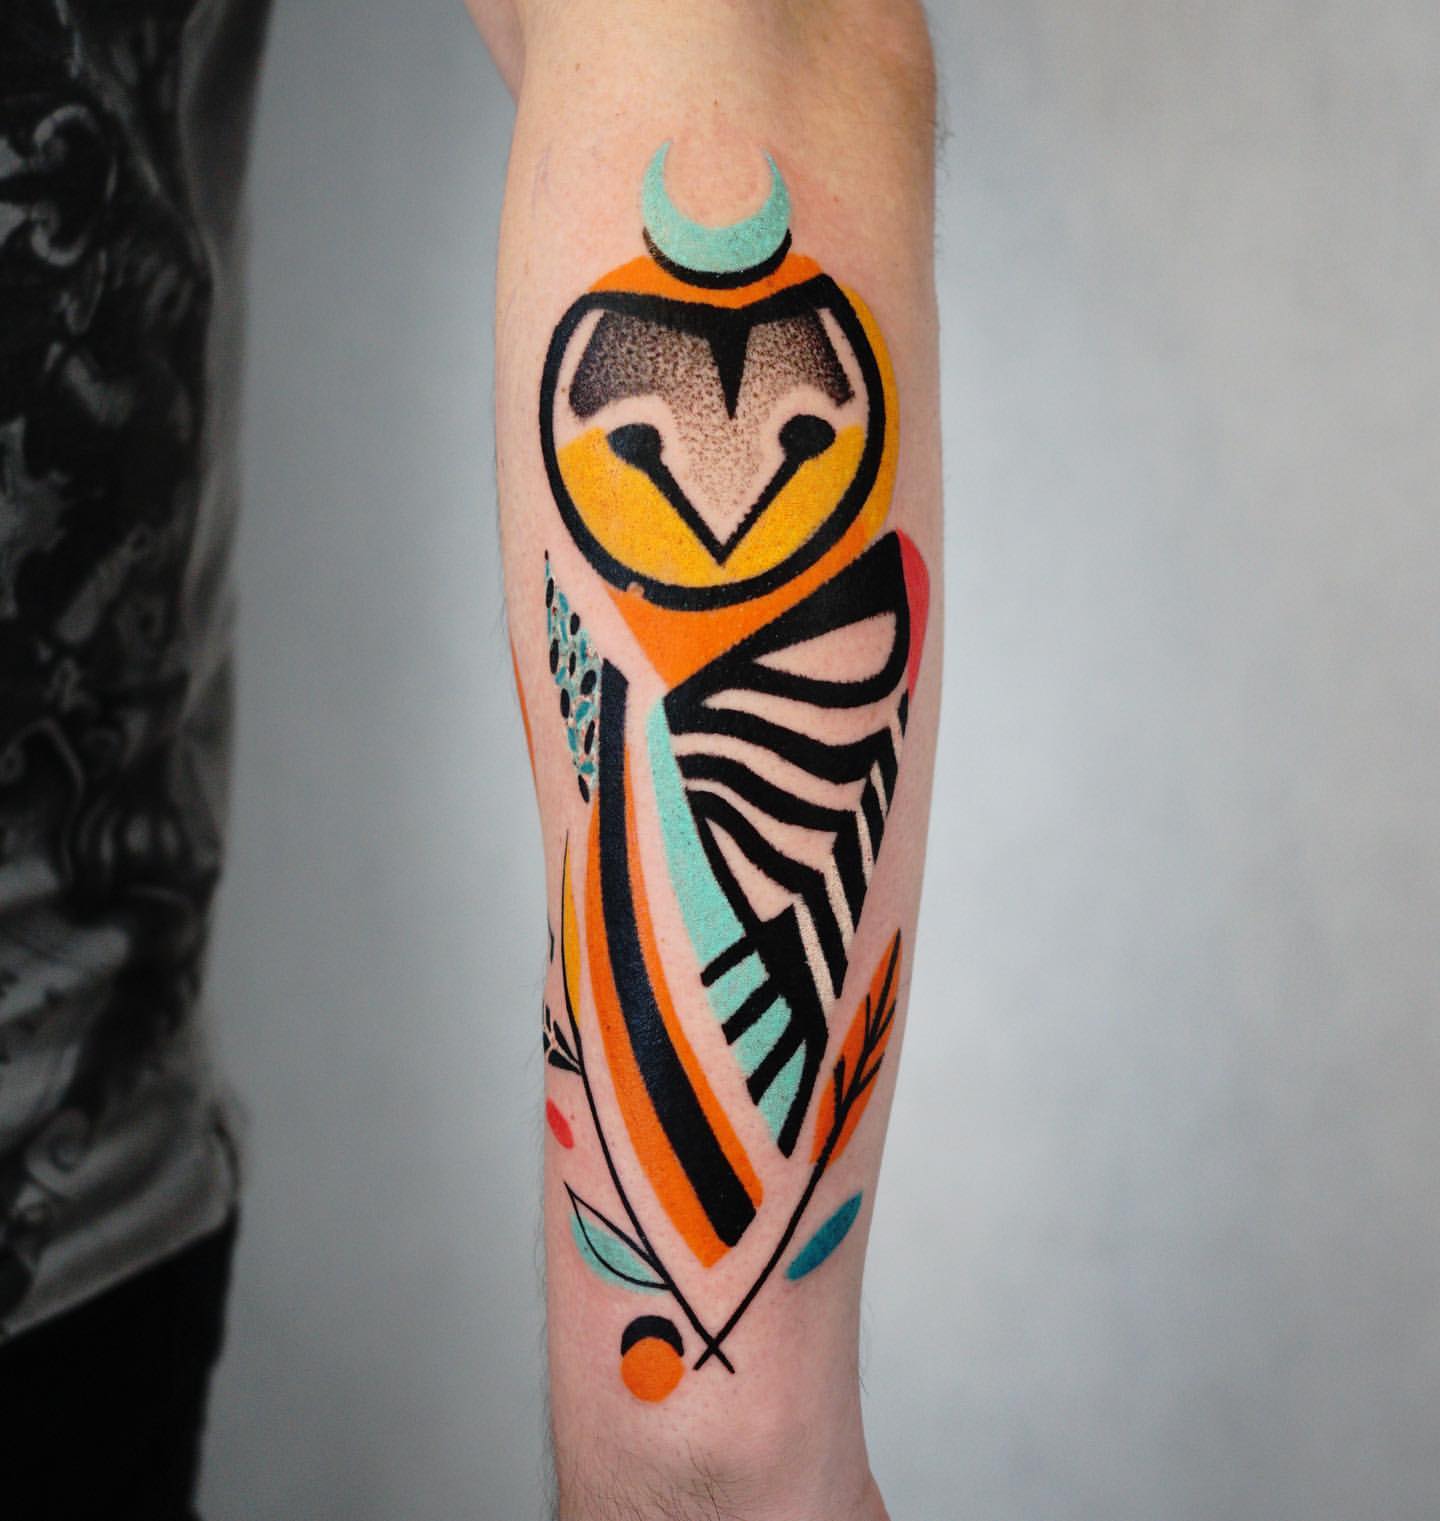 101 Best Mens Calf Tattoo Ideas That Will Blow Your Mind!